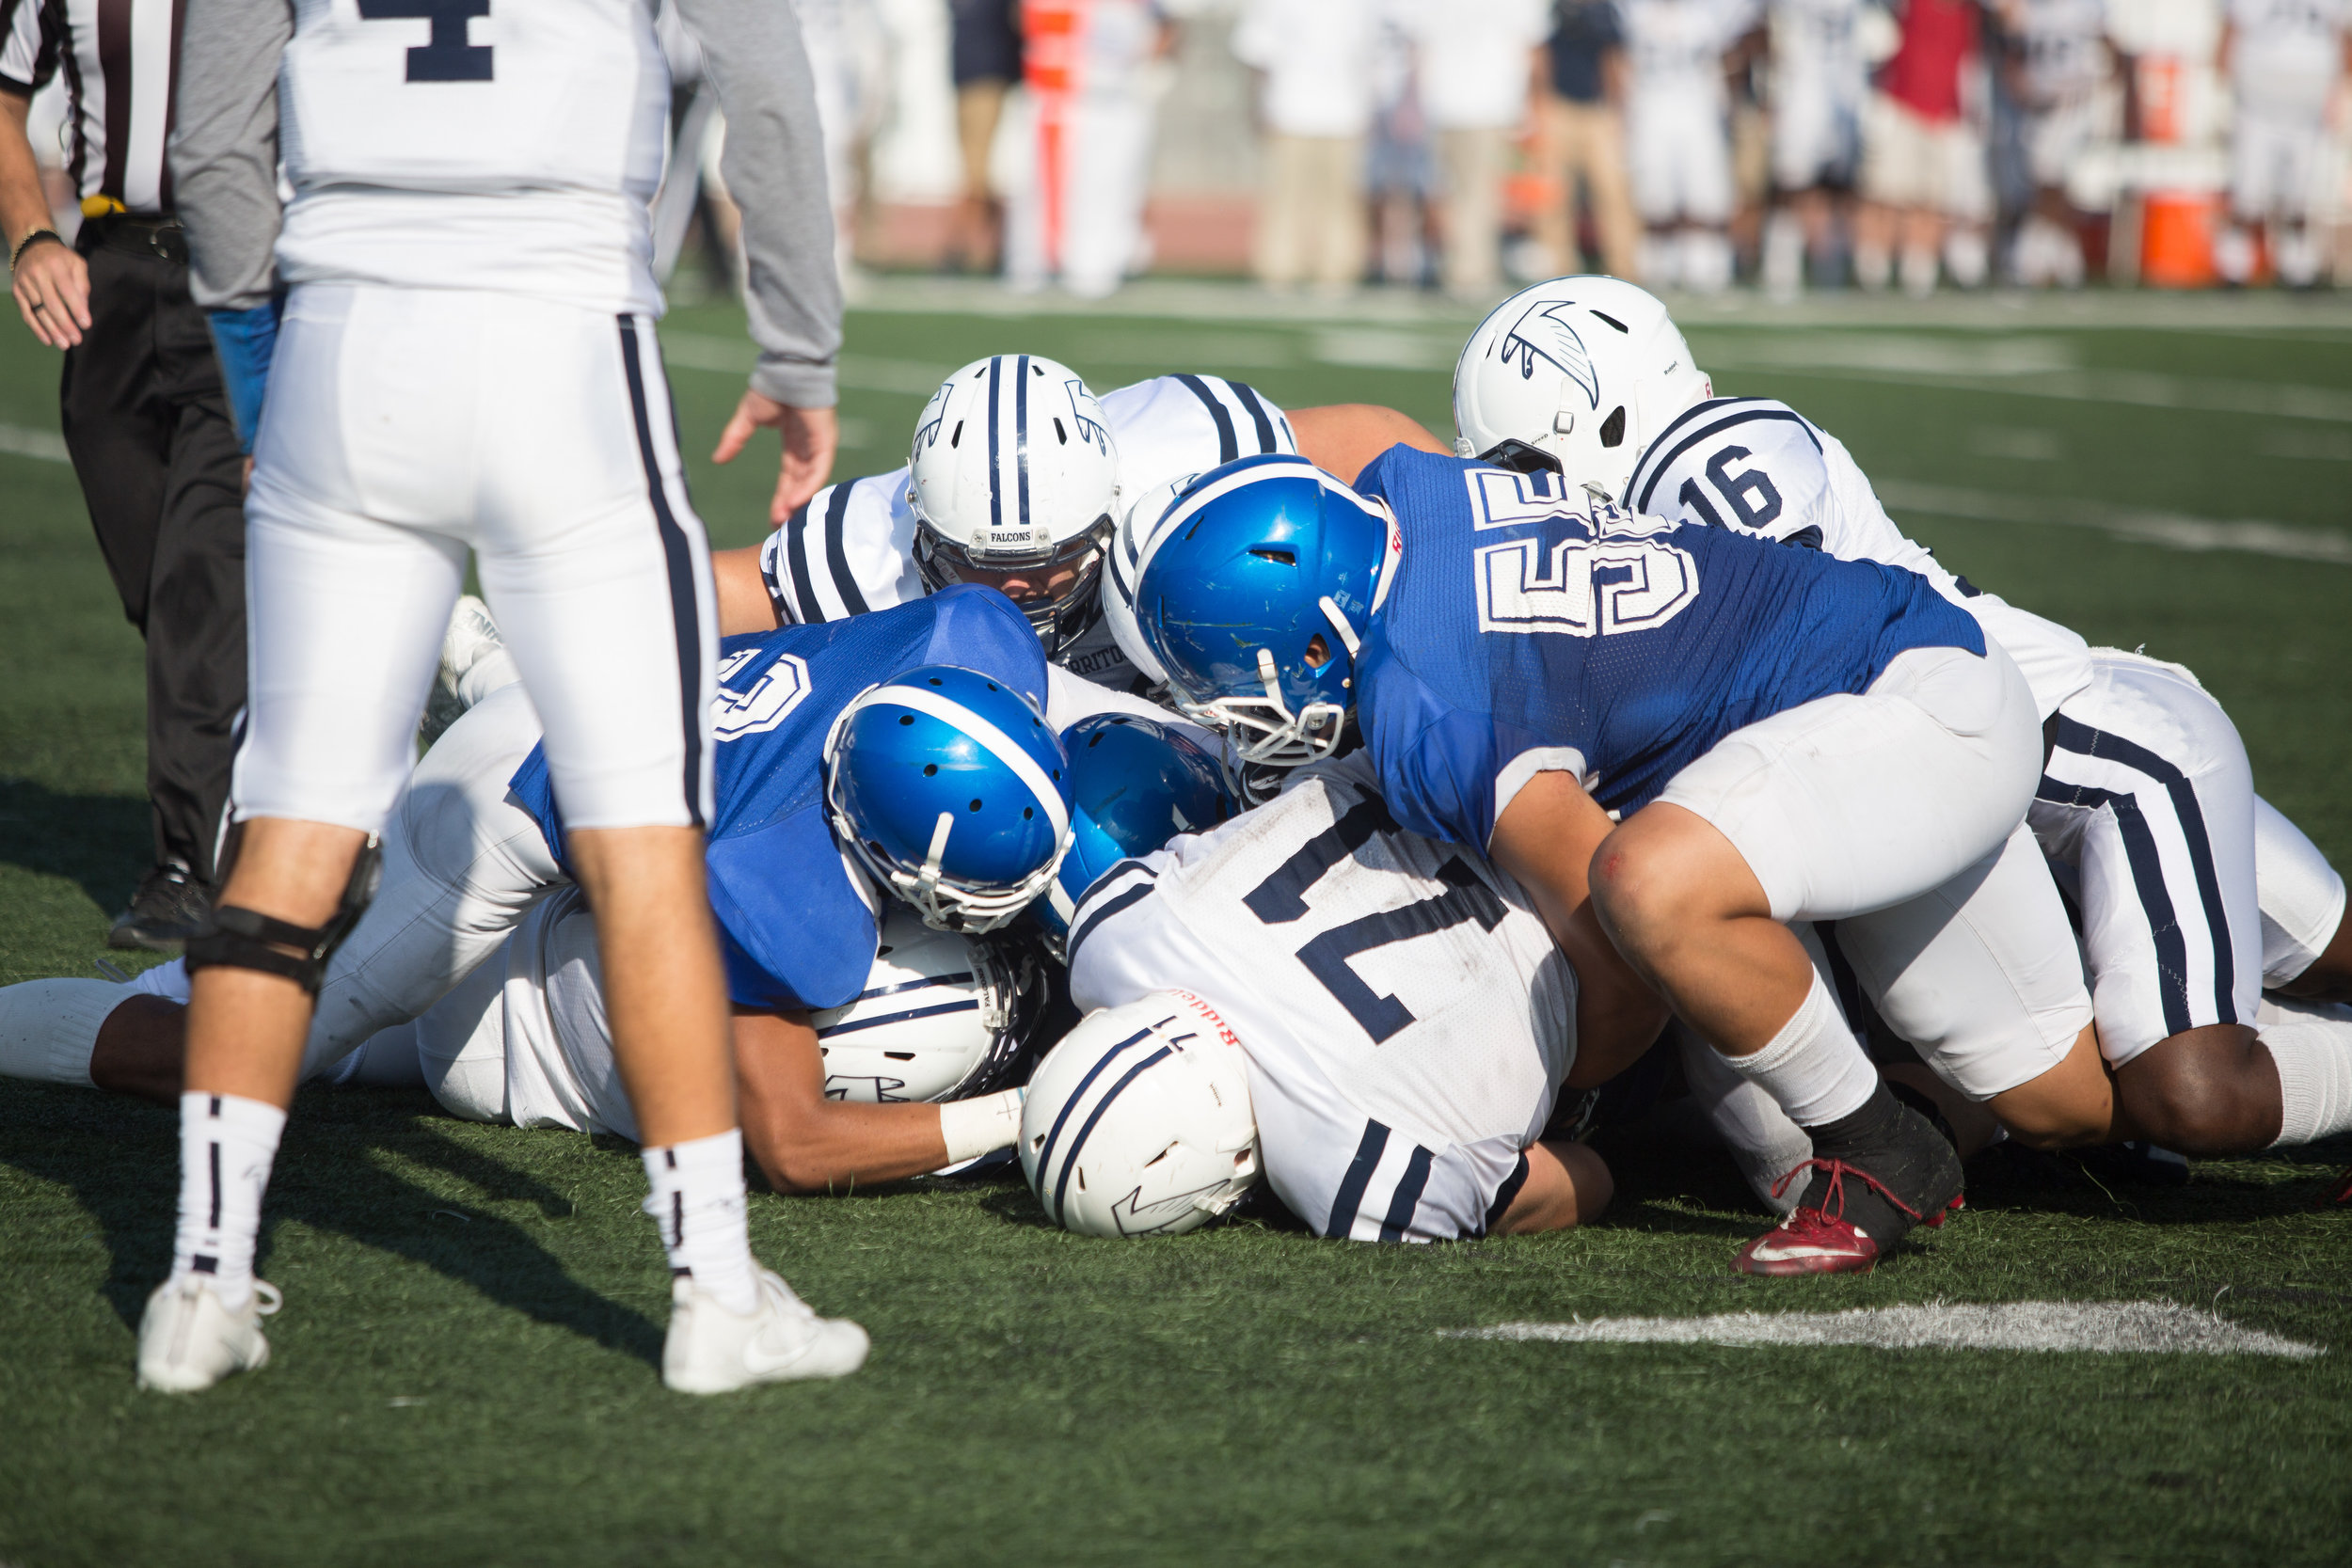  Players of both Santa Monica College and Cerritos college attempt to keep ball. The Santa Monica College Corsairs lose the game 7-31 against Cerritos Falcons on Saturday, October 14th, 2017 at the Corsair Stadium at Santa Monica College in Santa Mon